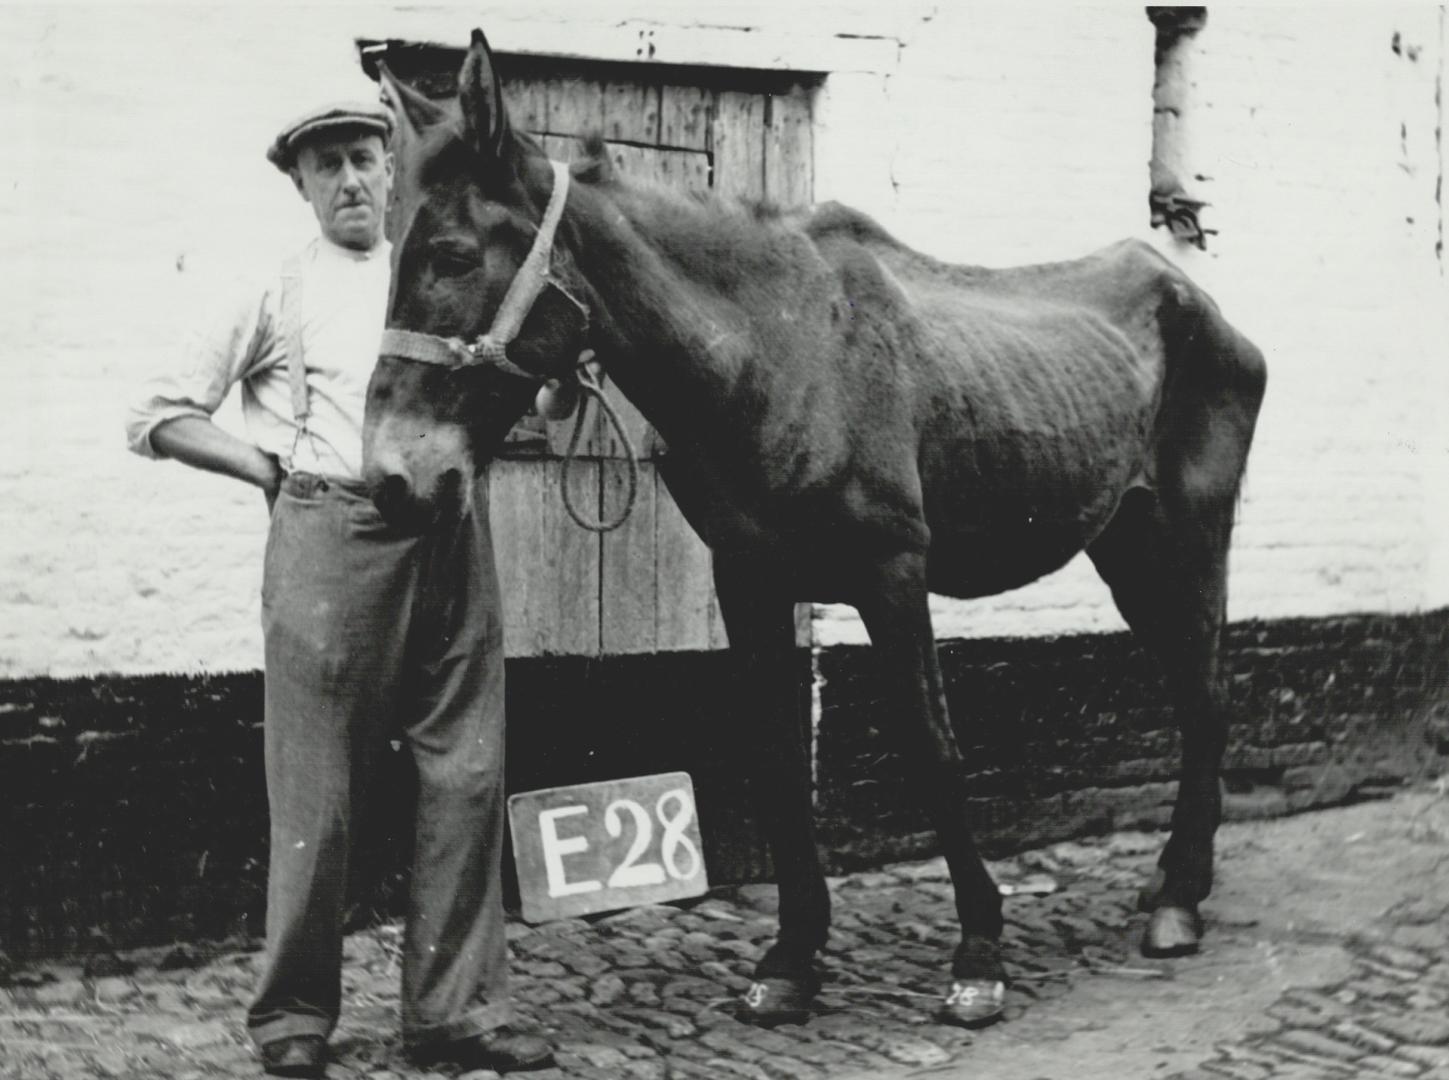 American mule rescued from suffering by [Incomplete]